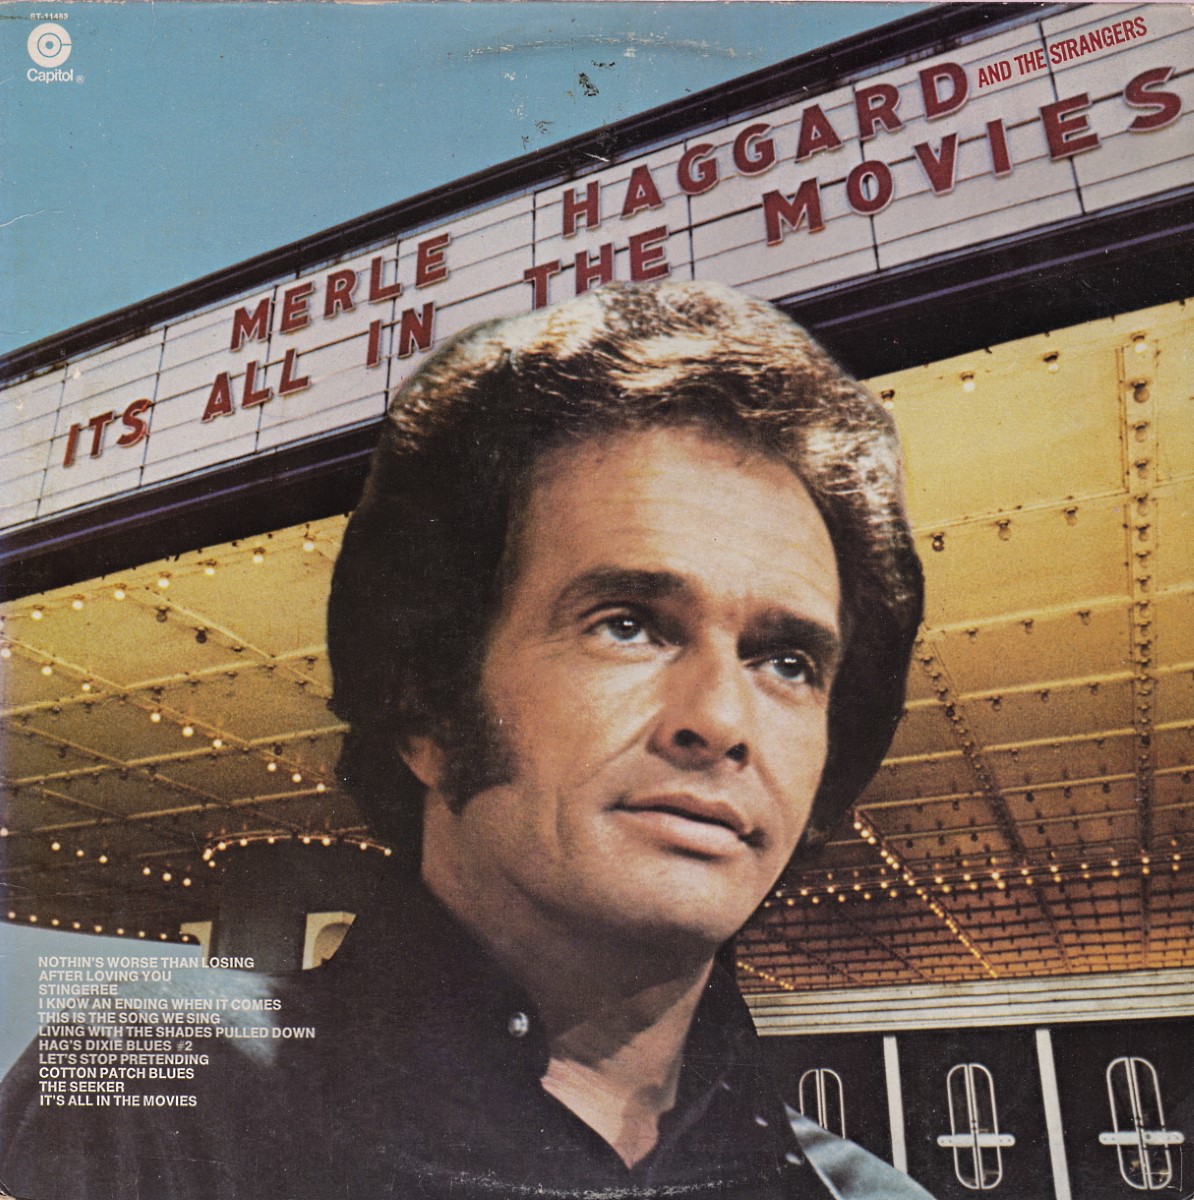 Merle Haggard And The Strangers - It's All In The Movies (1976)